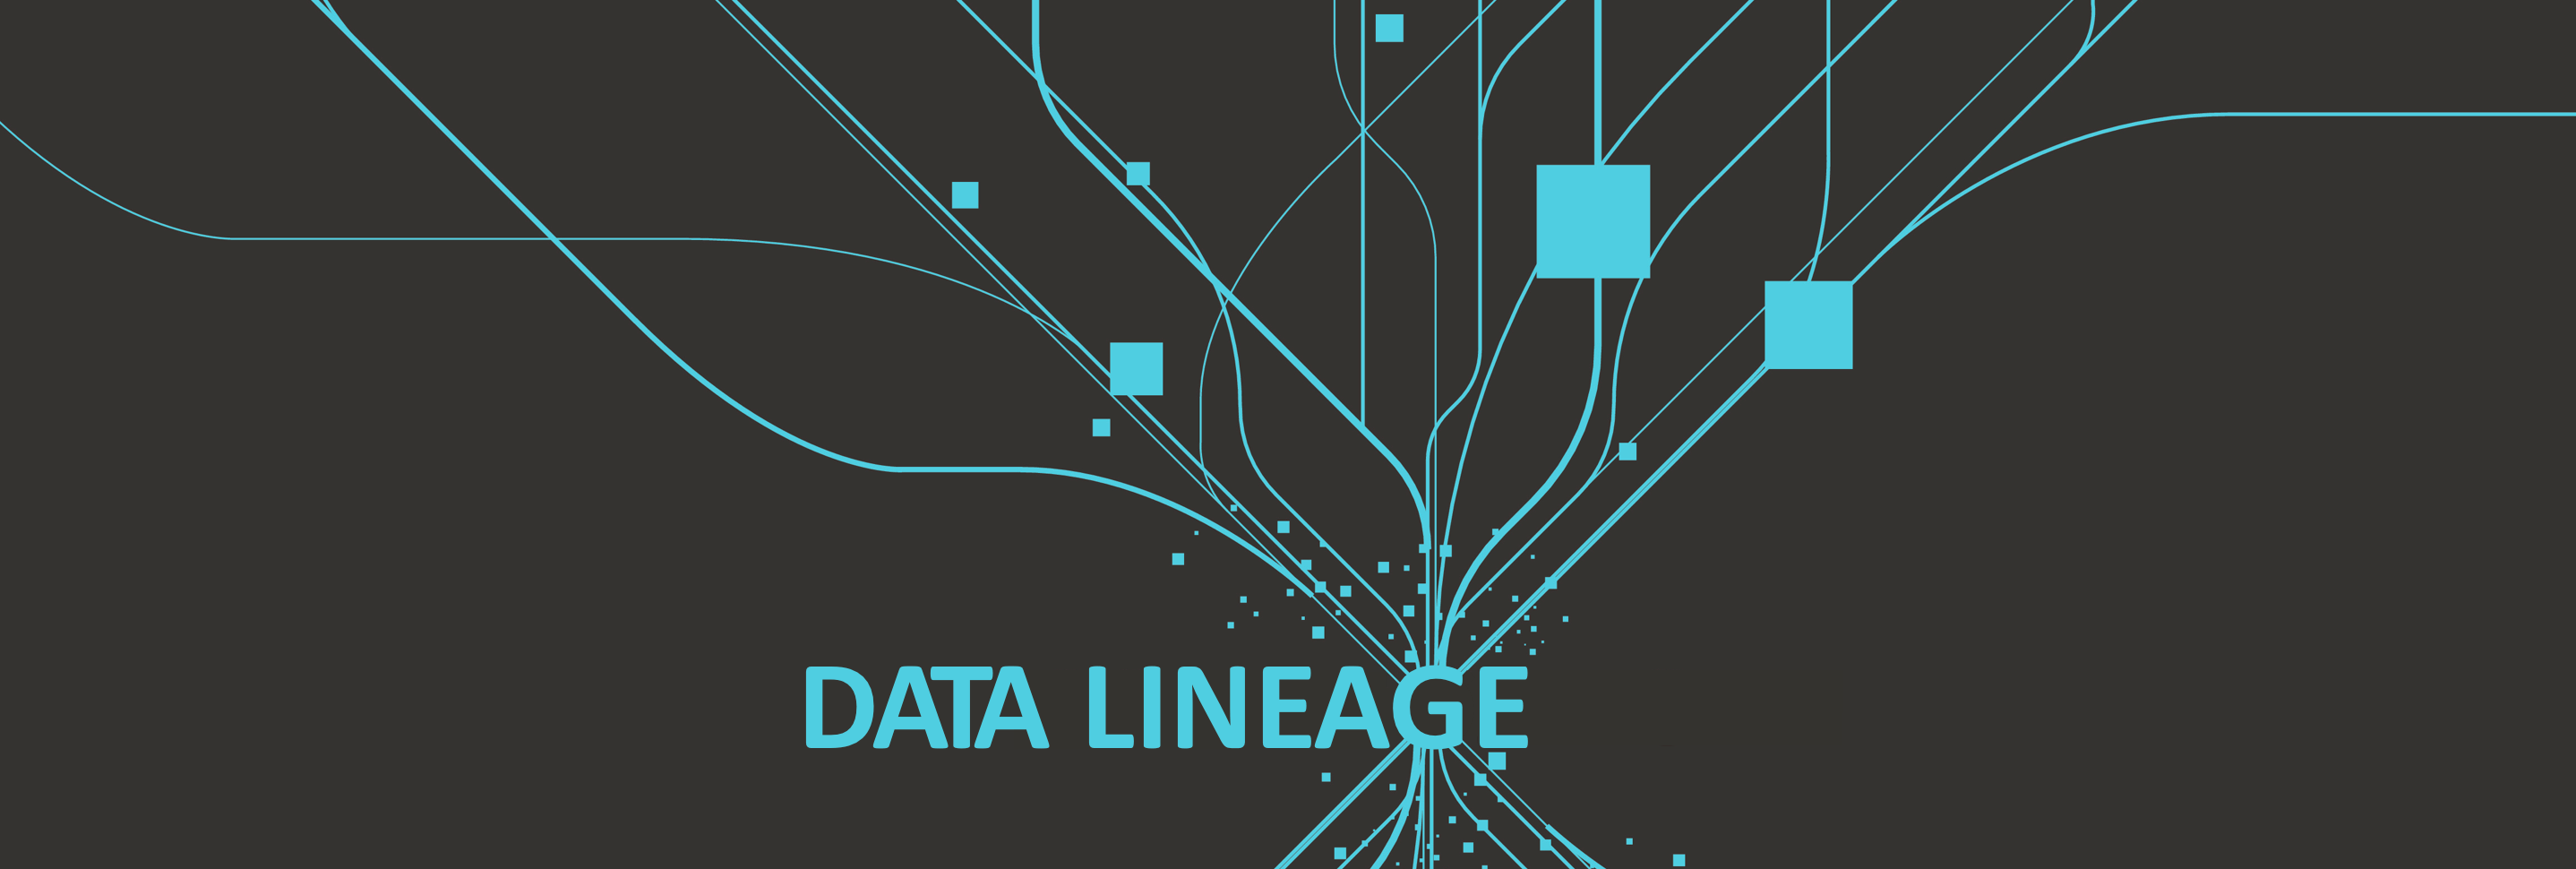 data lineage